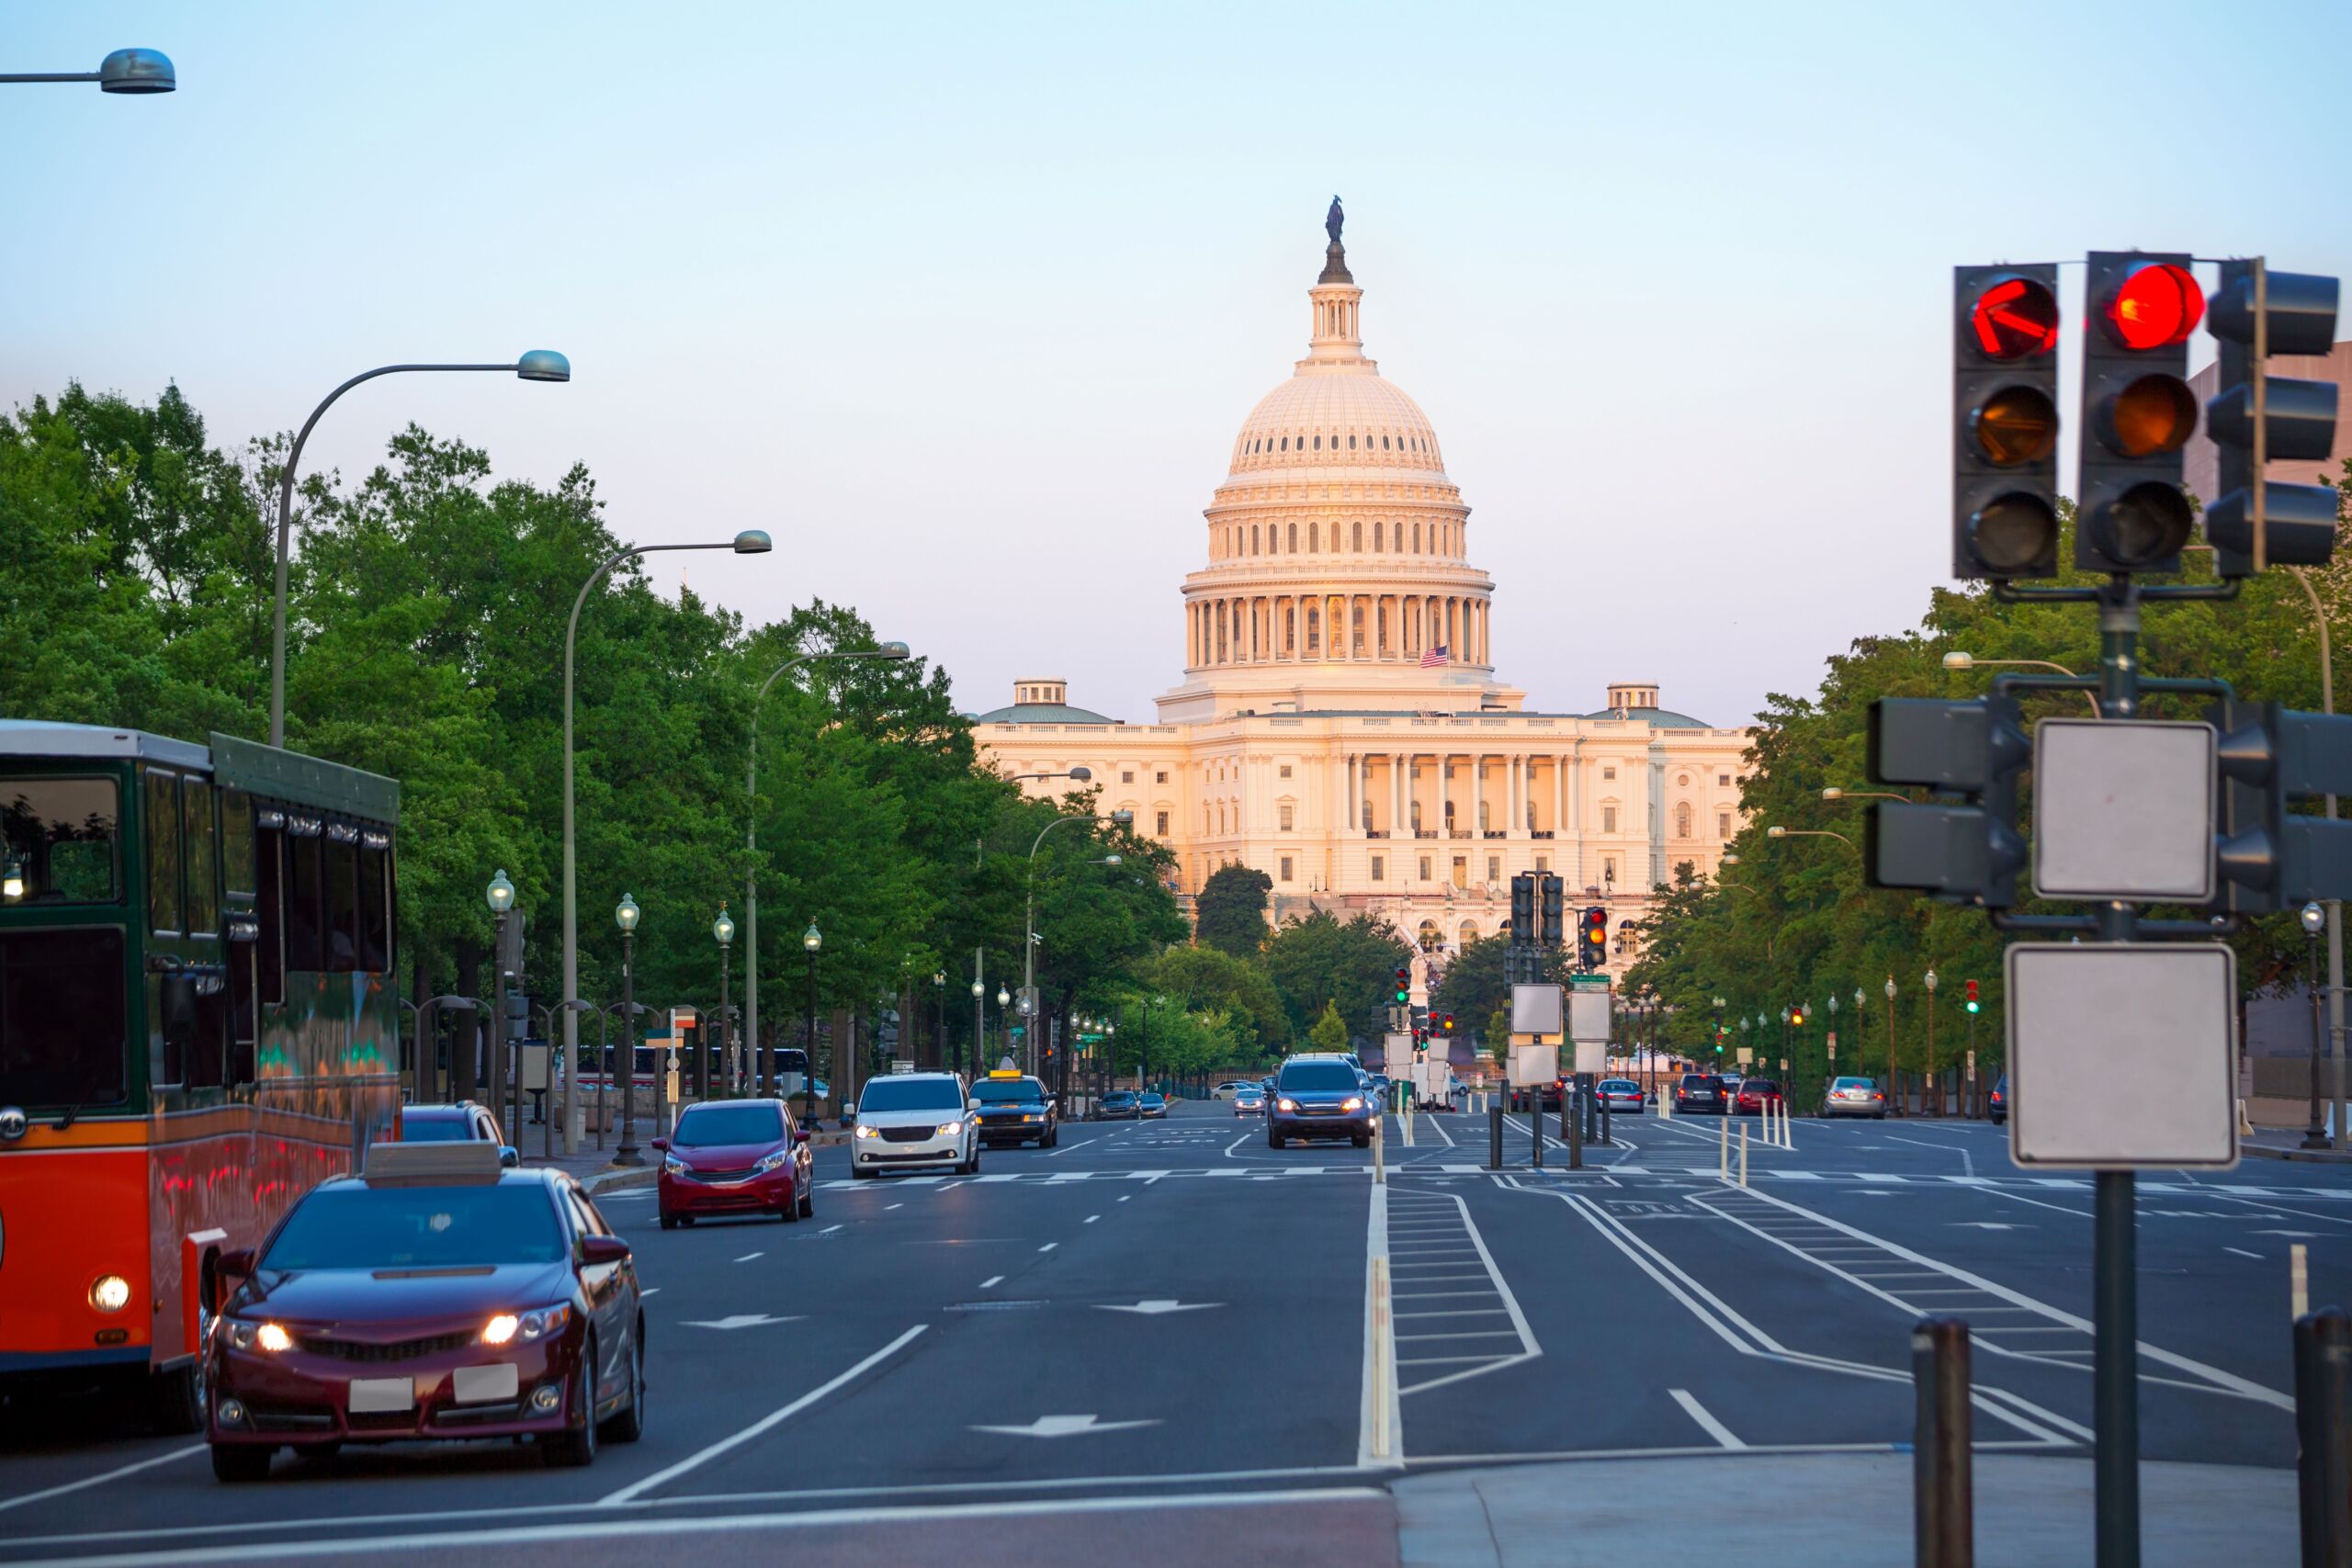 View of the U.S. Capitol down a busy road during sunset.